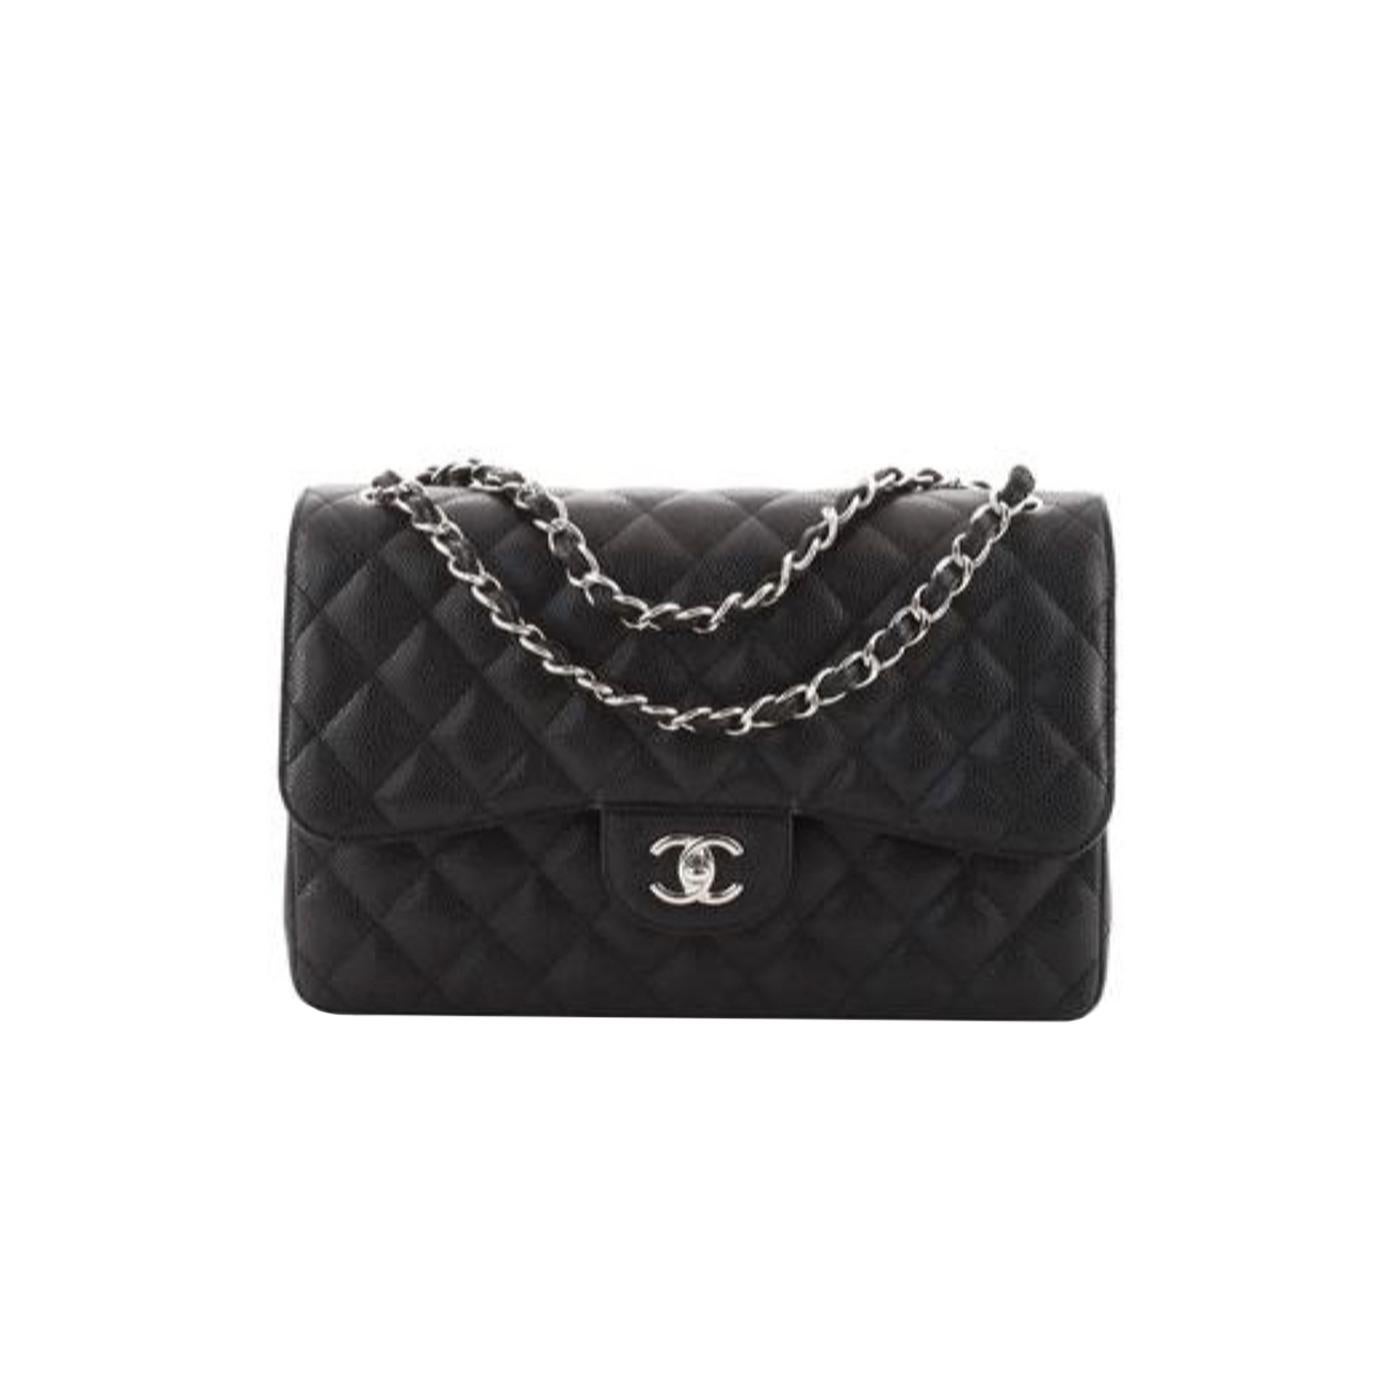 This Jumbo Classic Double Flap bag is in black caviar leather with silver-tone hardware and features a front flap with signature CC turn-lock closure, and adjustable interwoven silver-tone chain link, and a black leather shoulder